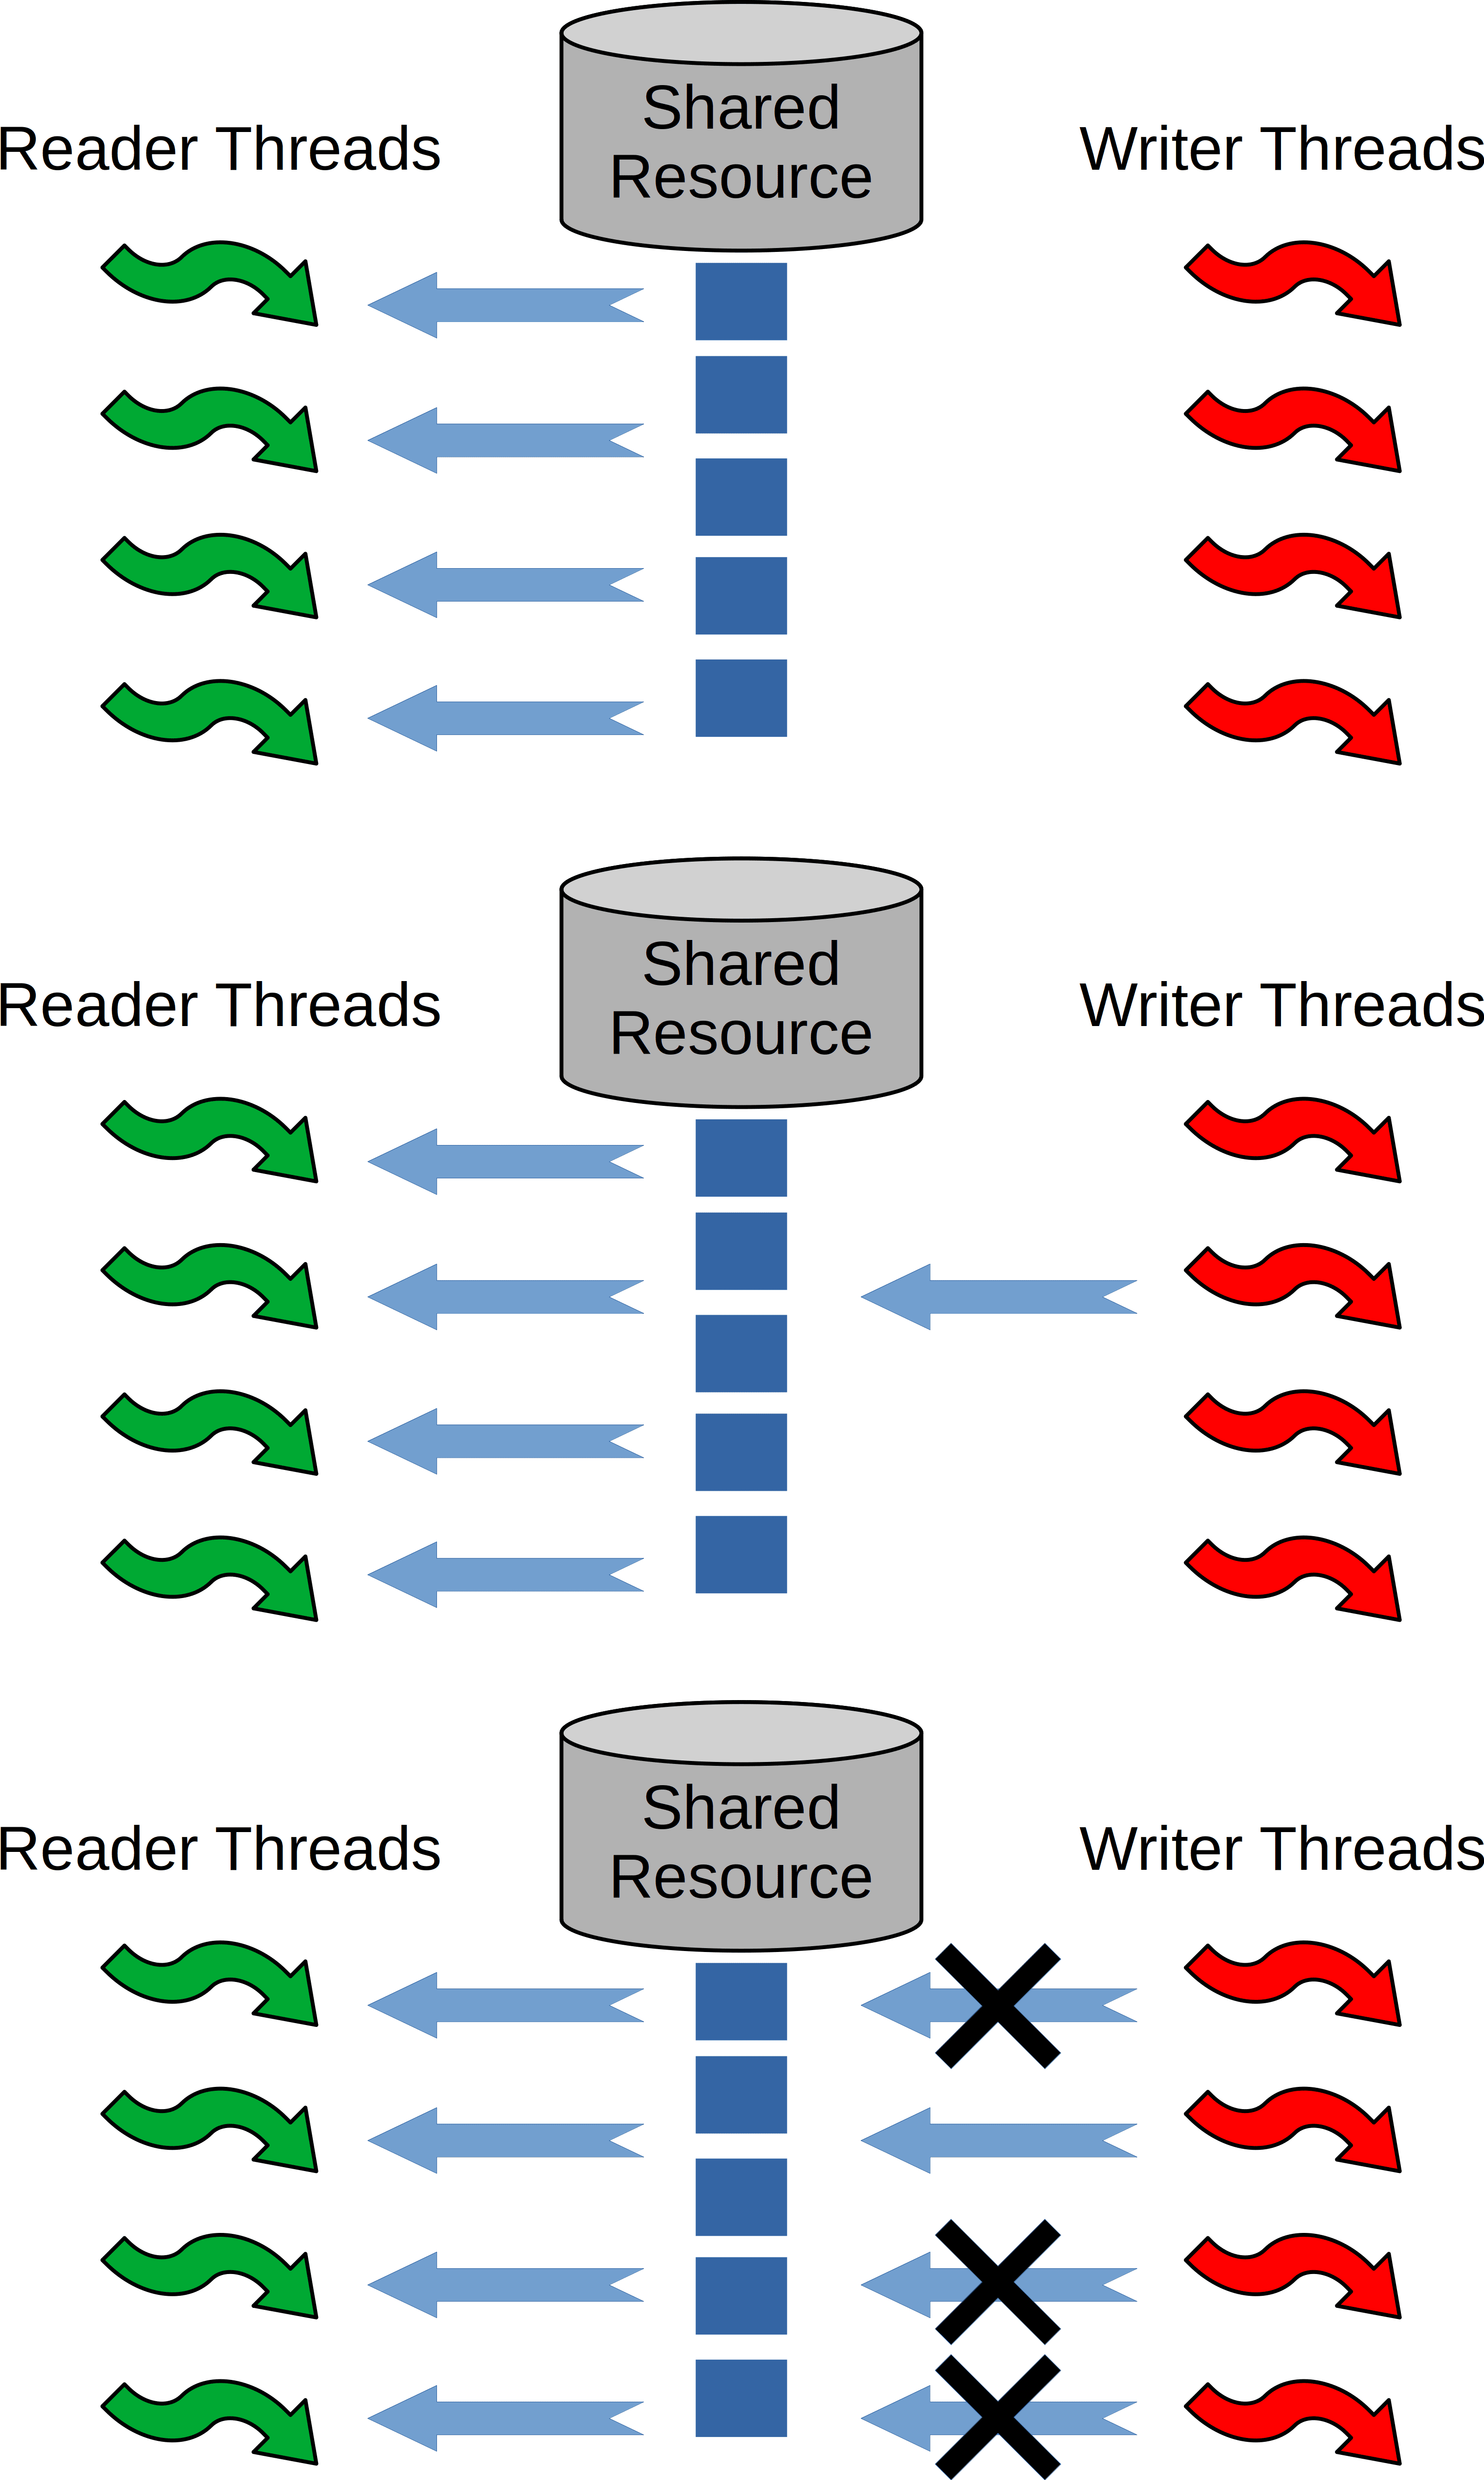 Second Variation of the Readers-Writers Problem